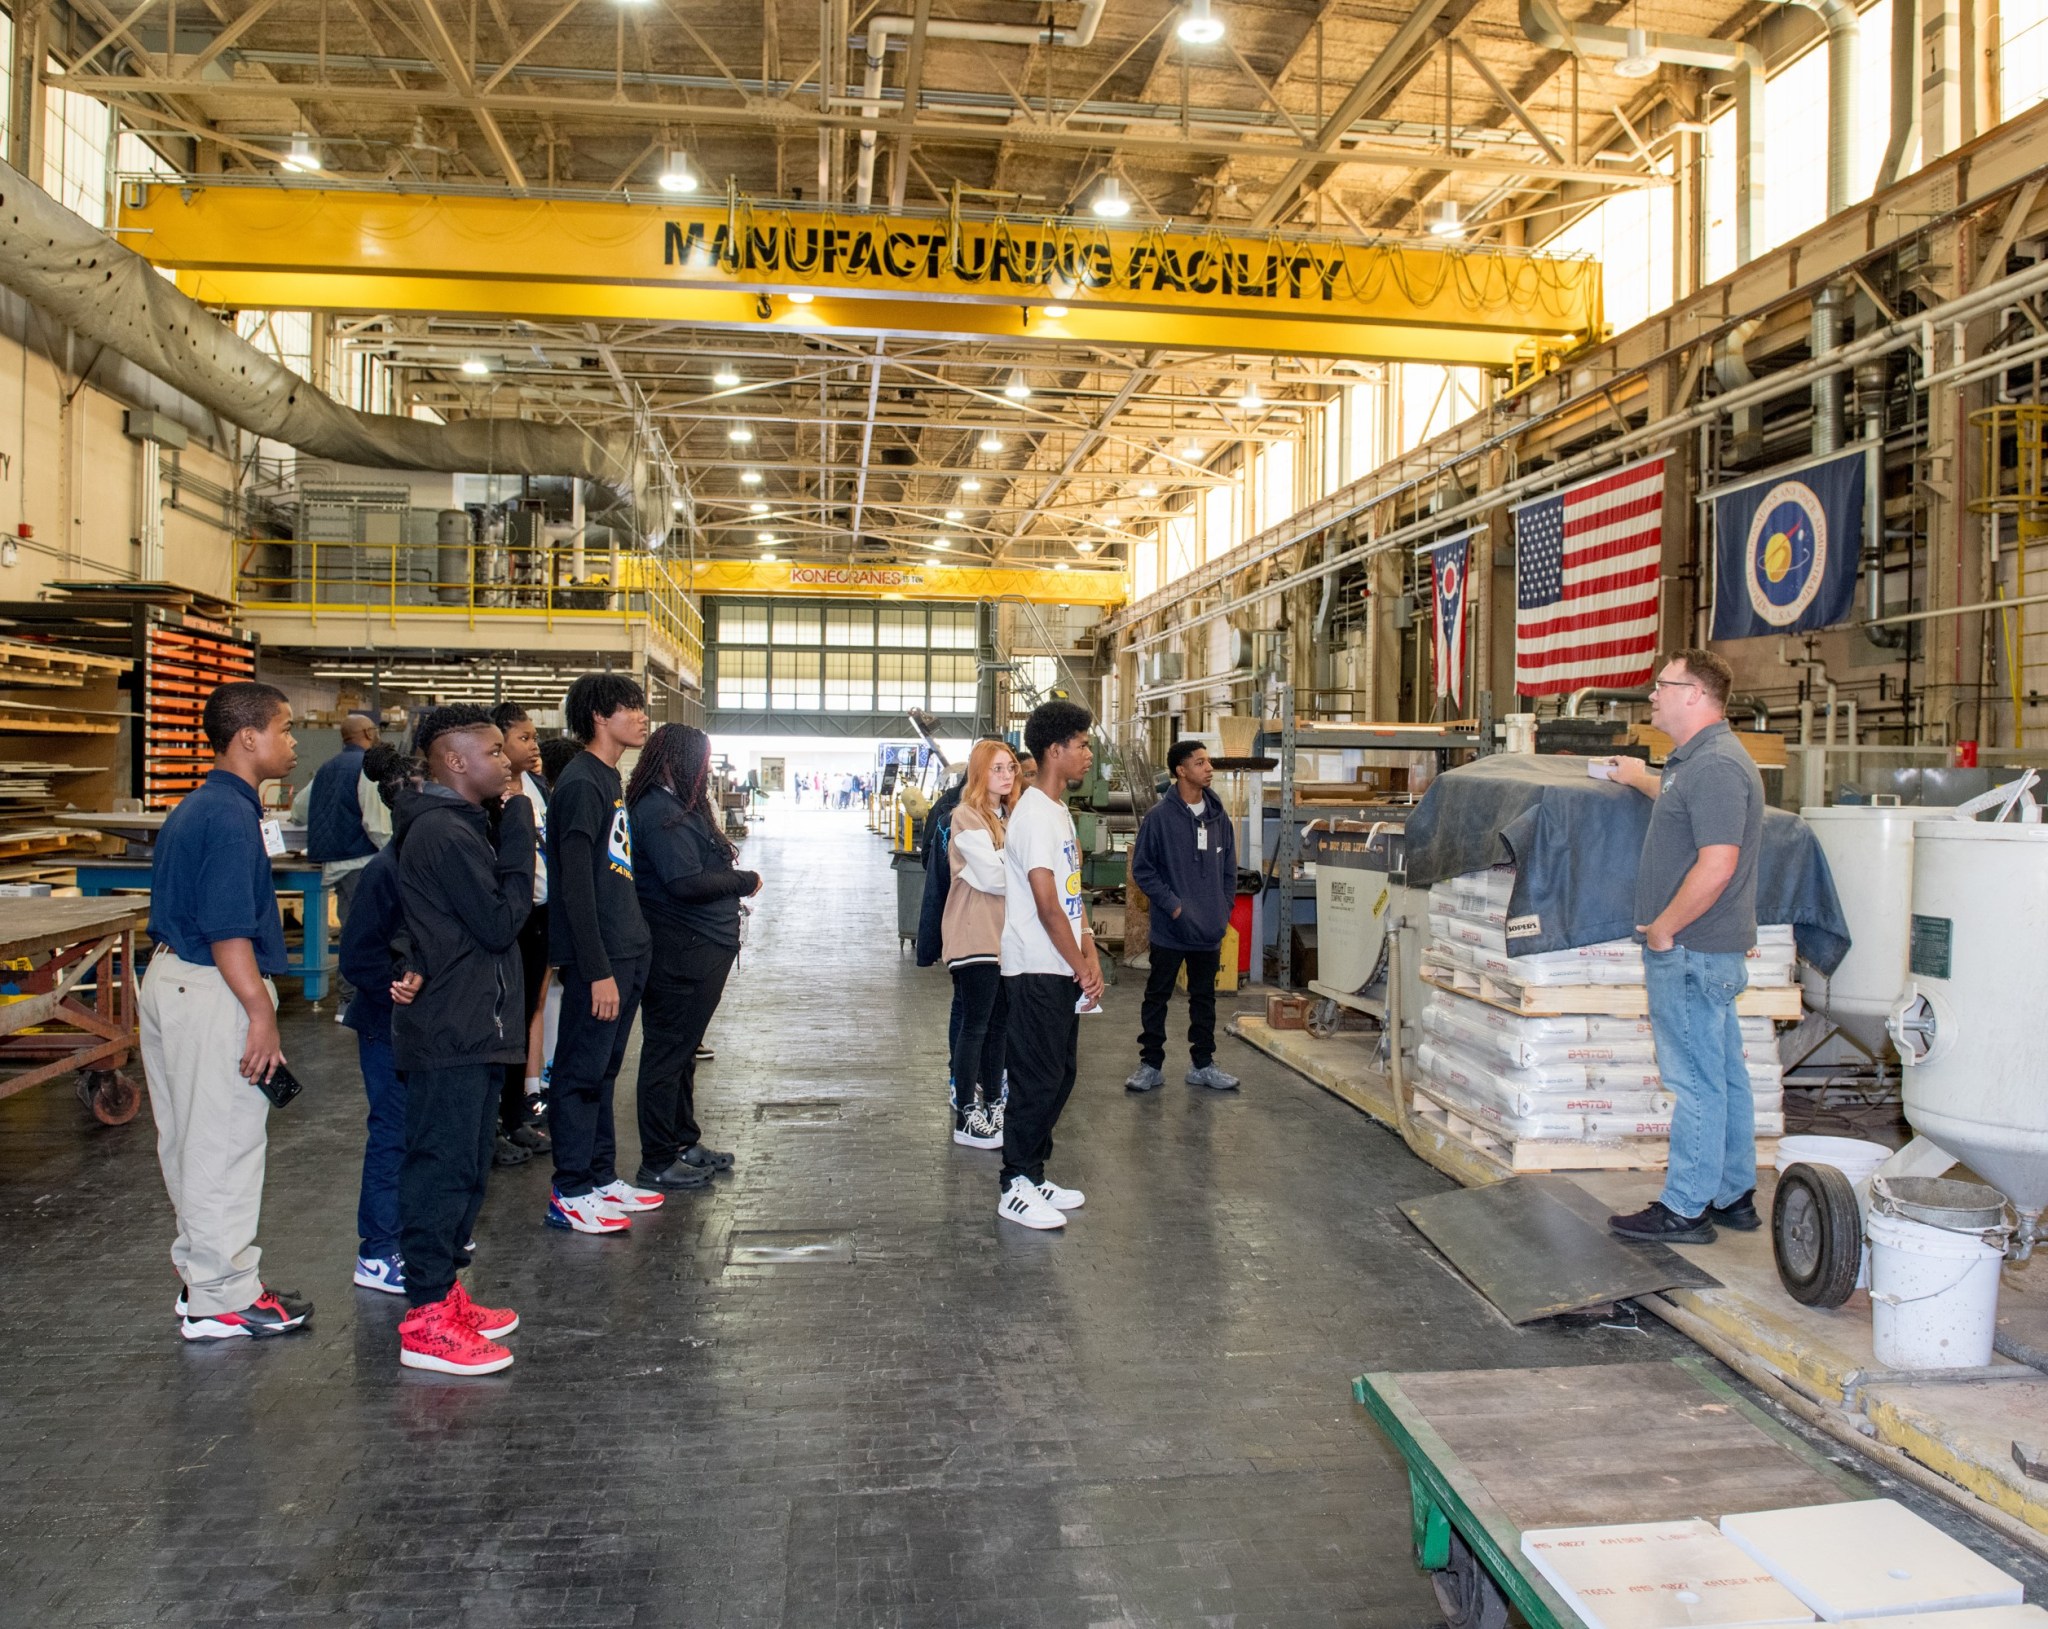 Inside a large warehouse-type facility, students observe Matt Conley as he talks about manufacturing at NASA’s Glenn Research Center. 